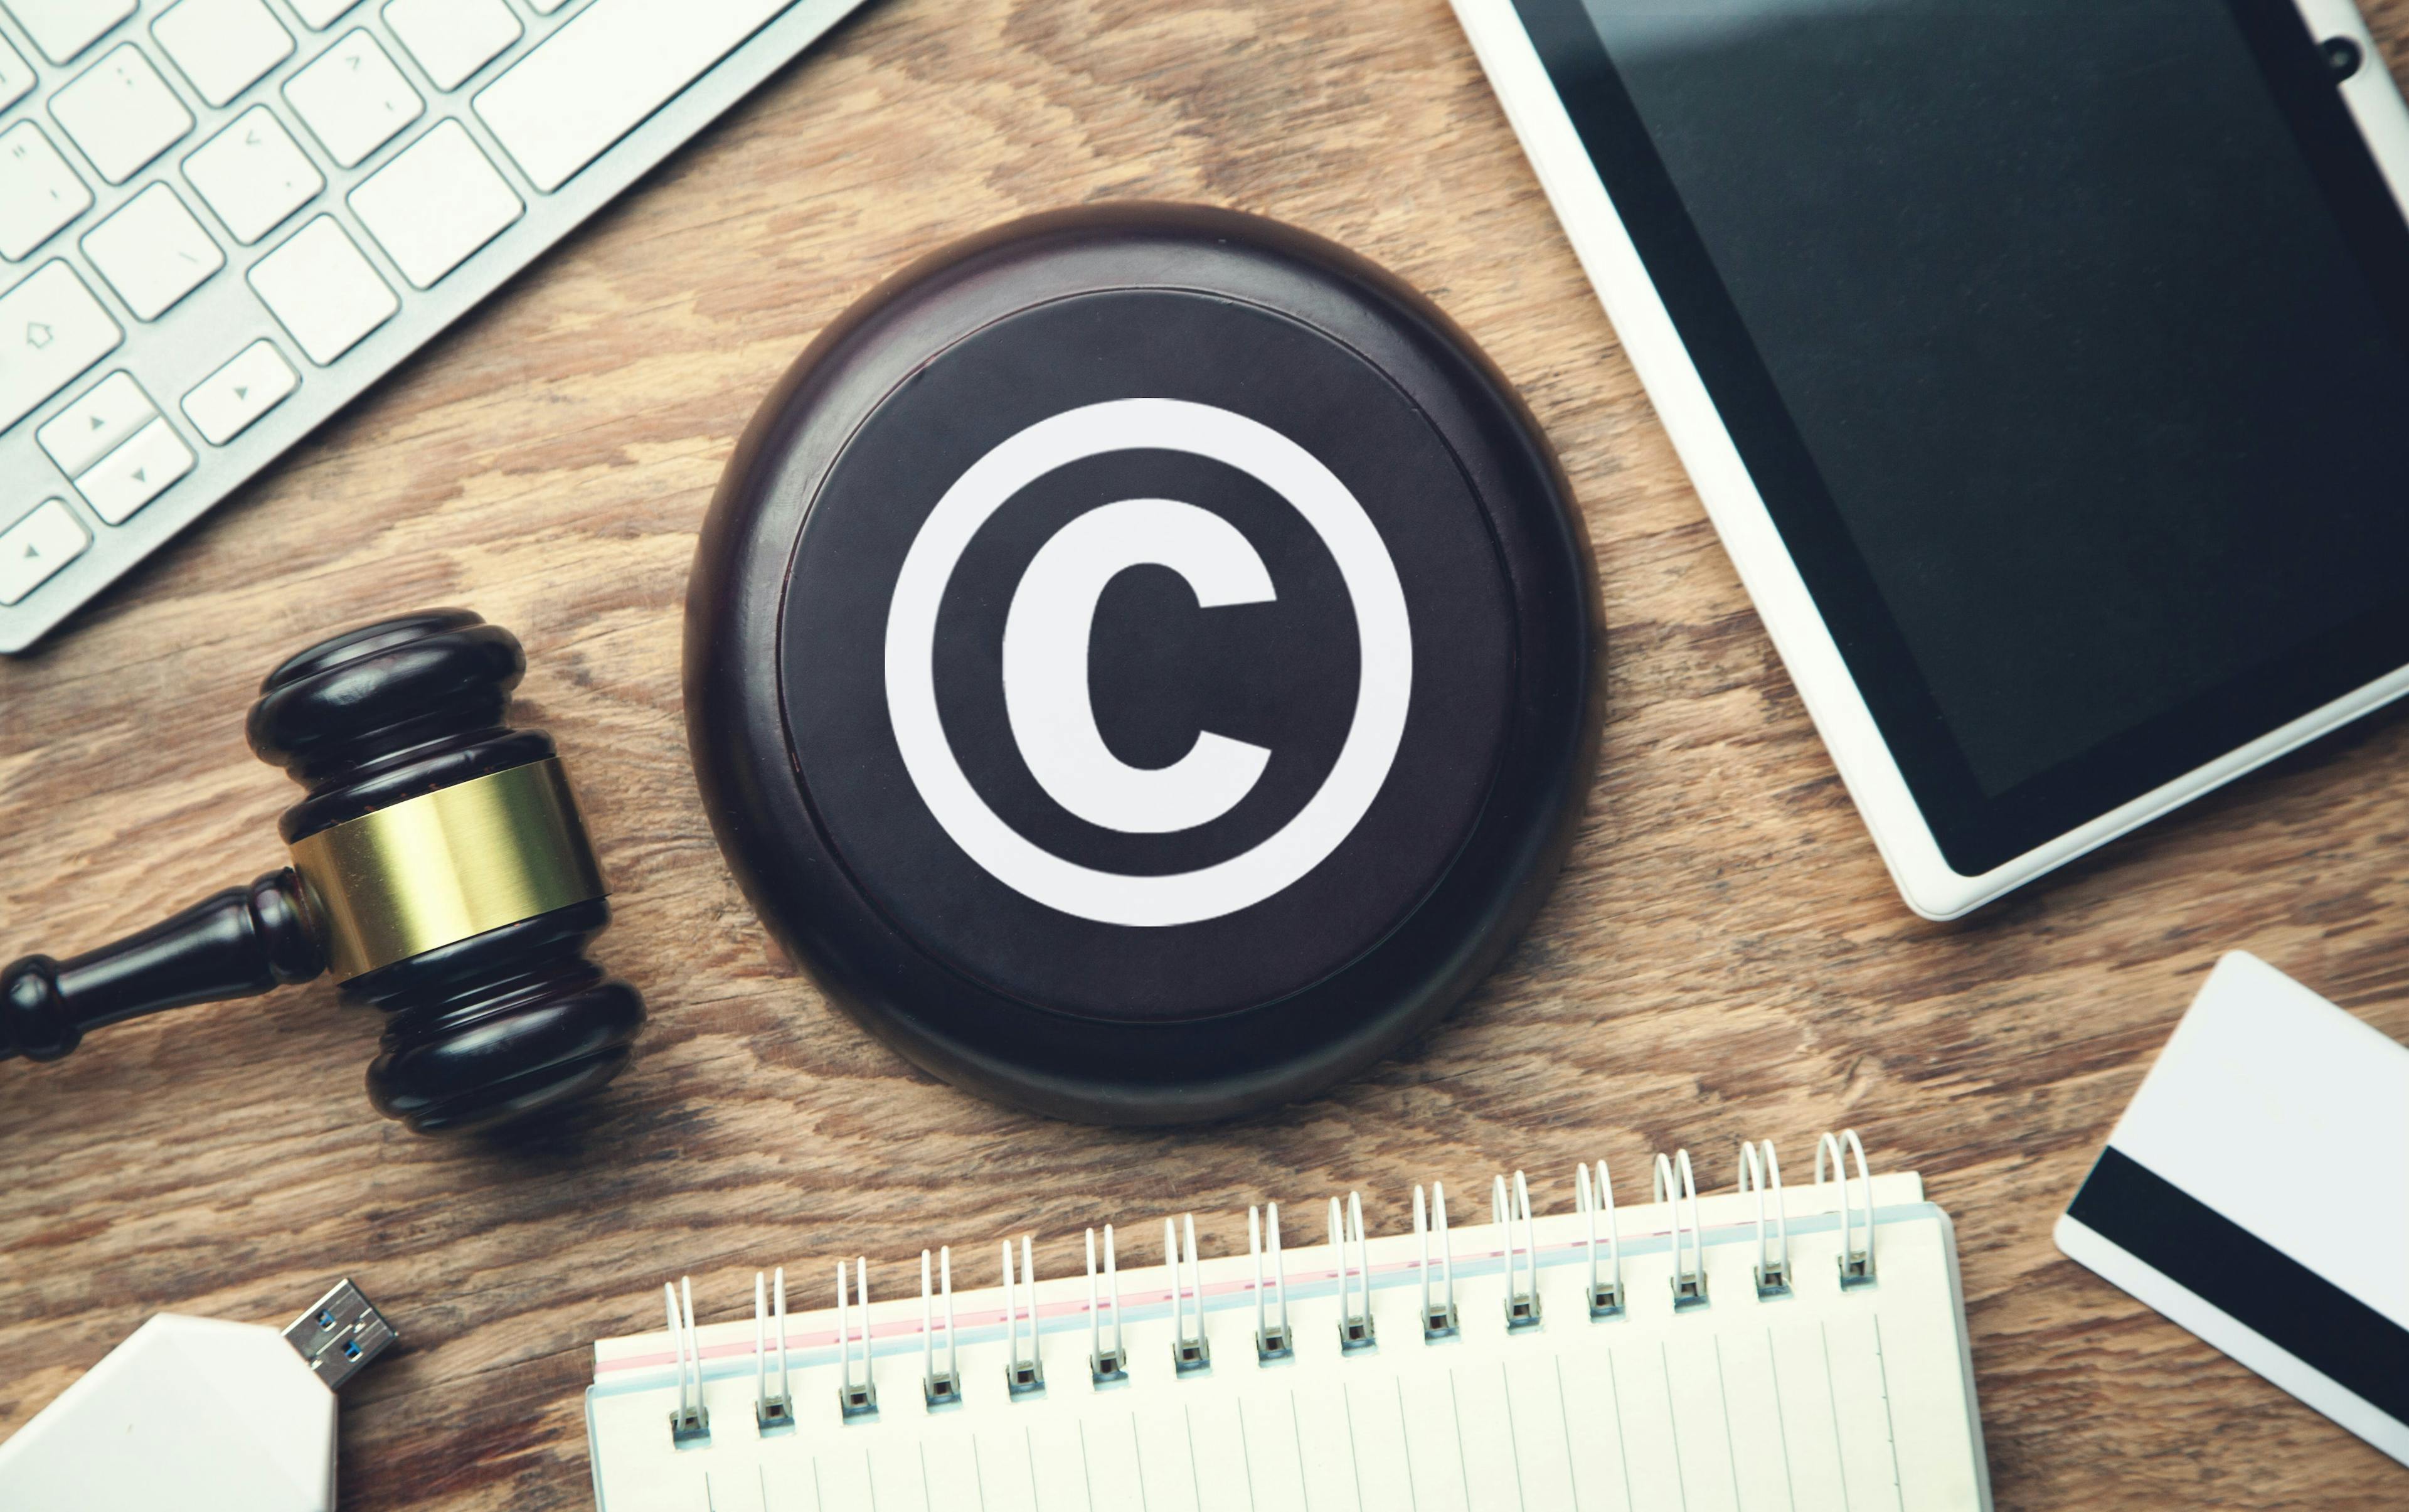 Why And How To Protect Software Copyright